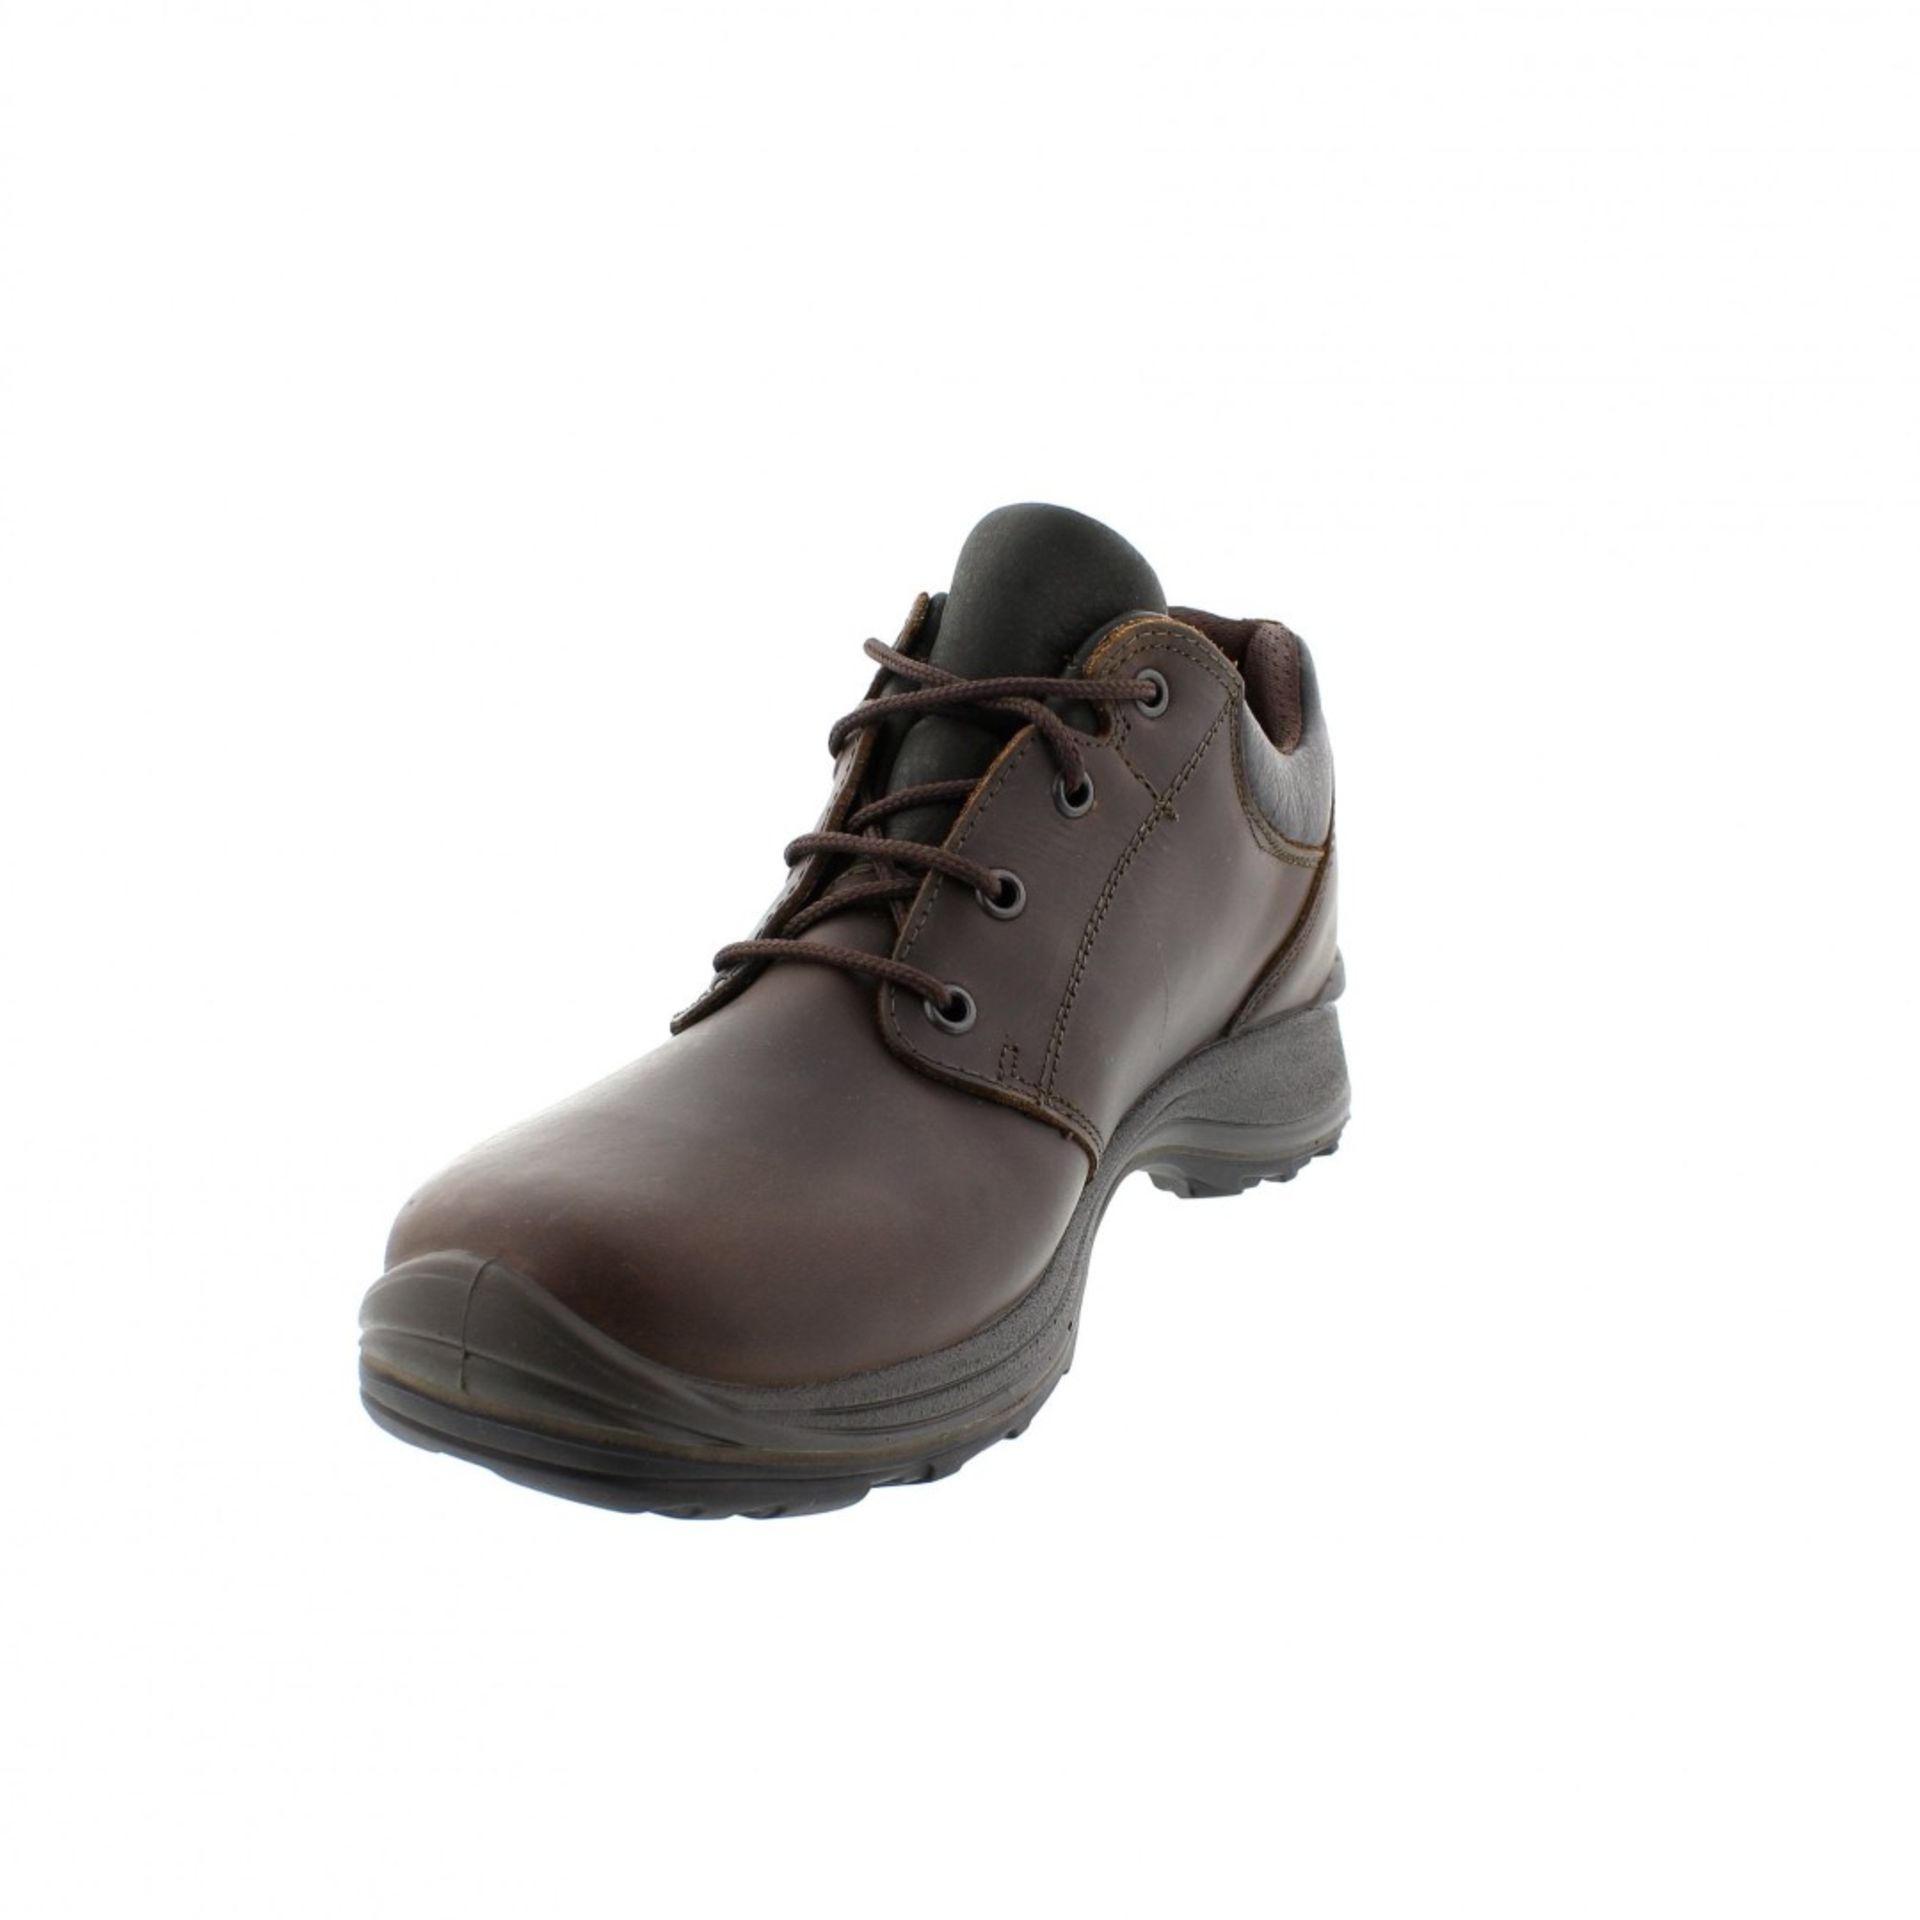 1 x Pair of Men's Grisport Brown Leather GriTex Shoes - Rogerson Footwear - Brand New and Boxed - - Image 3 of 10